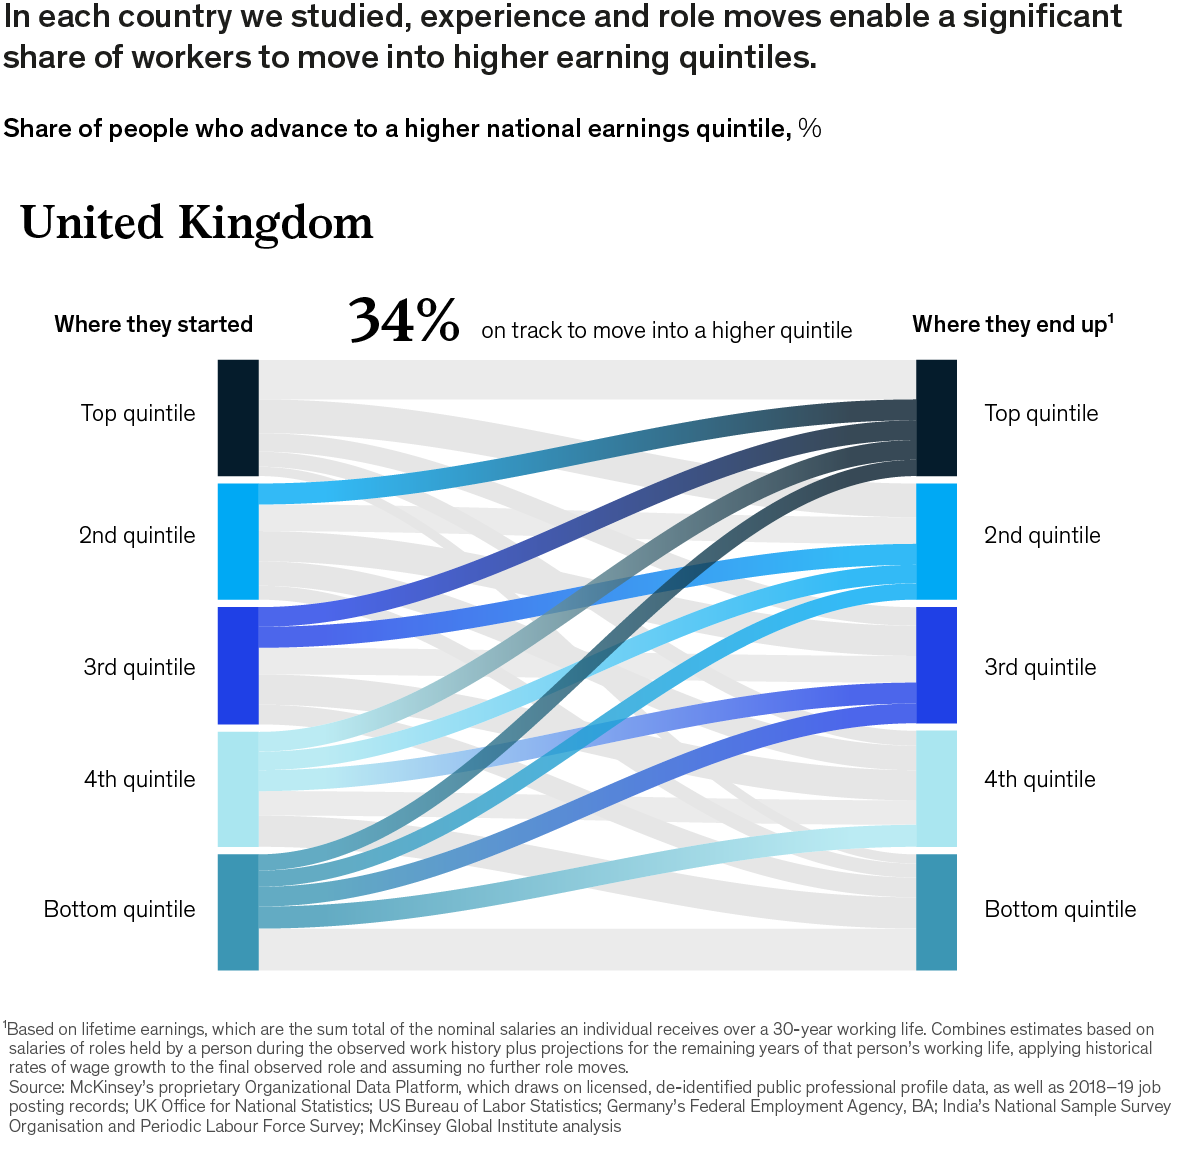 Chart of people who advanced to a higher national earnings quintile in the UK